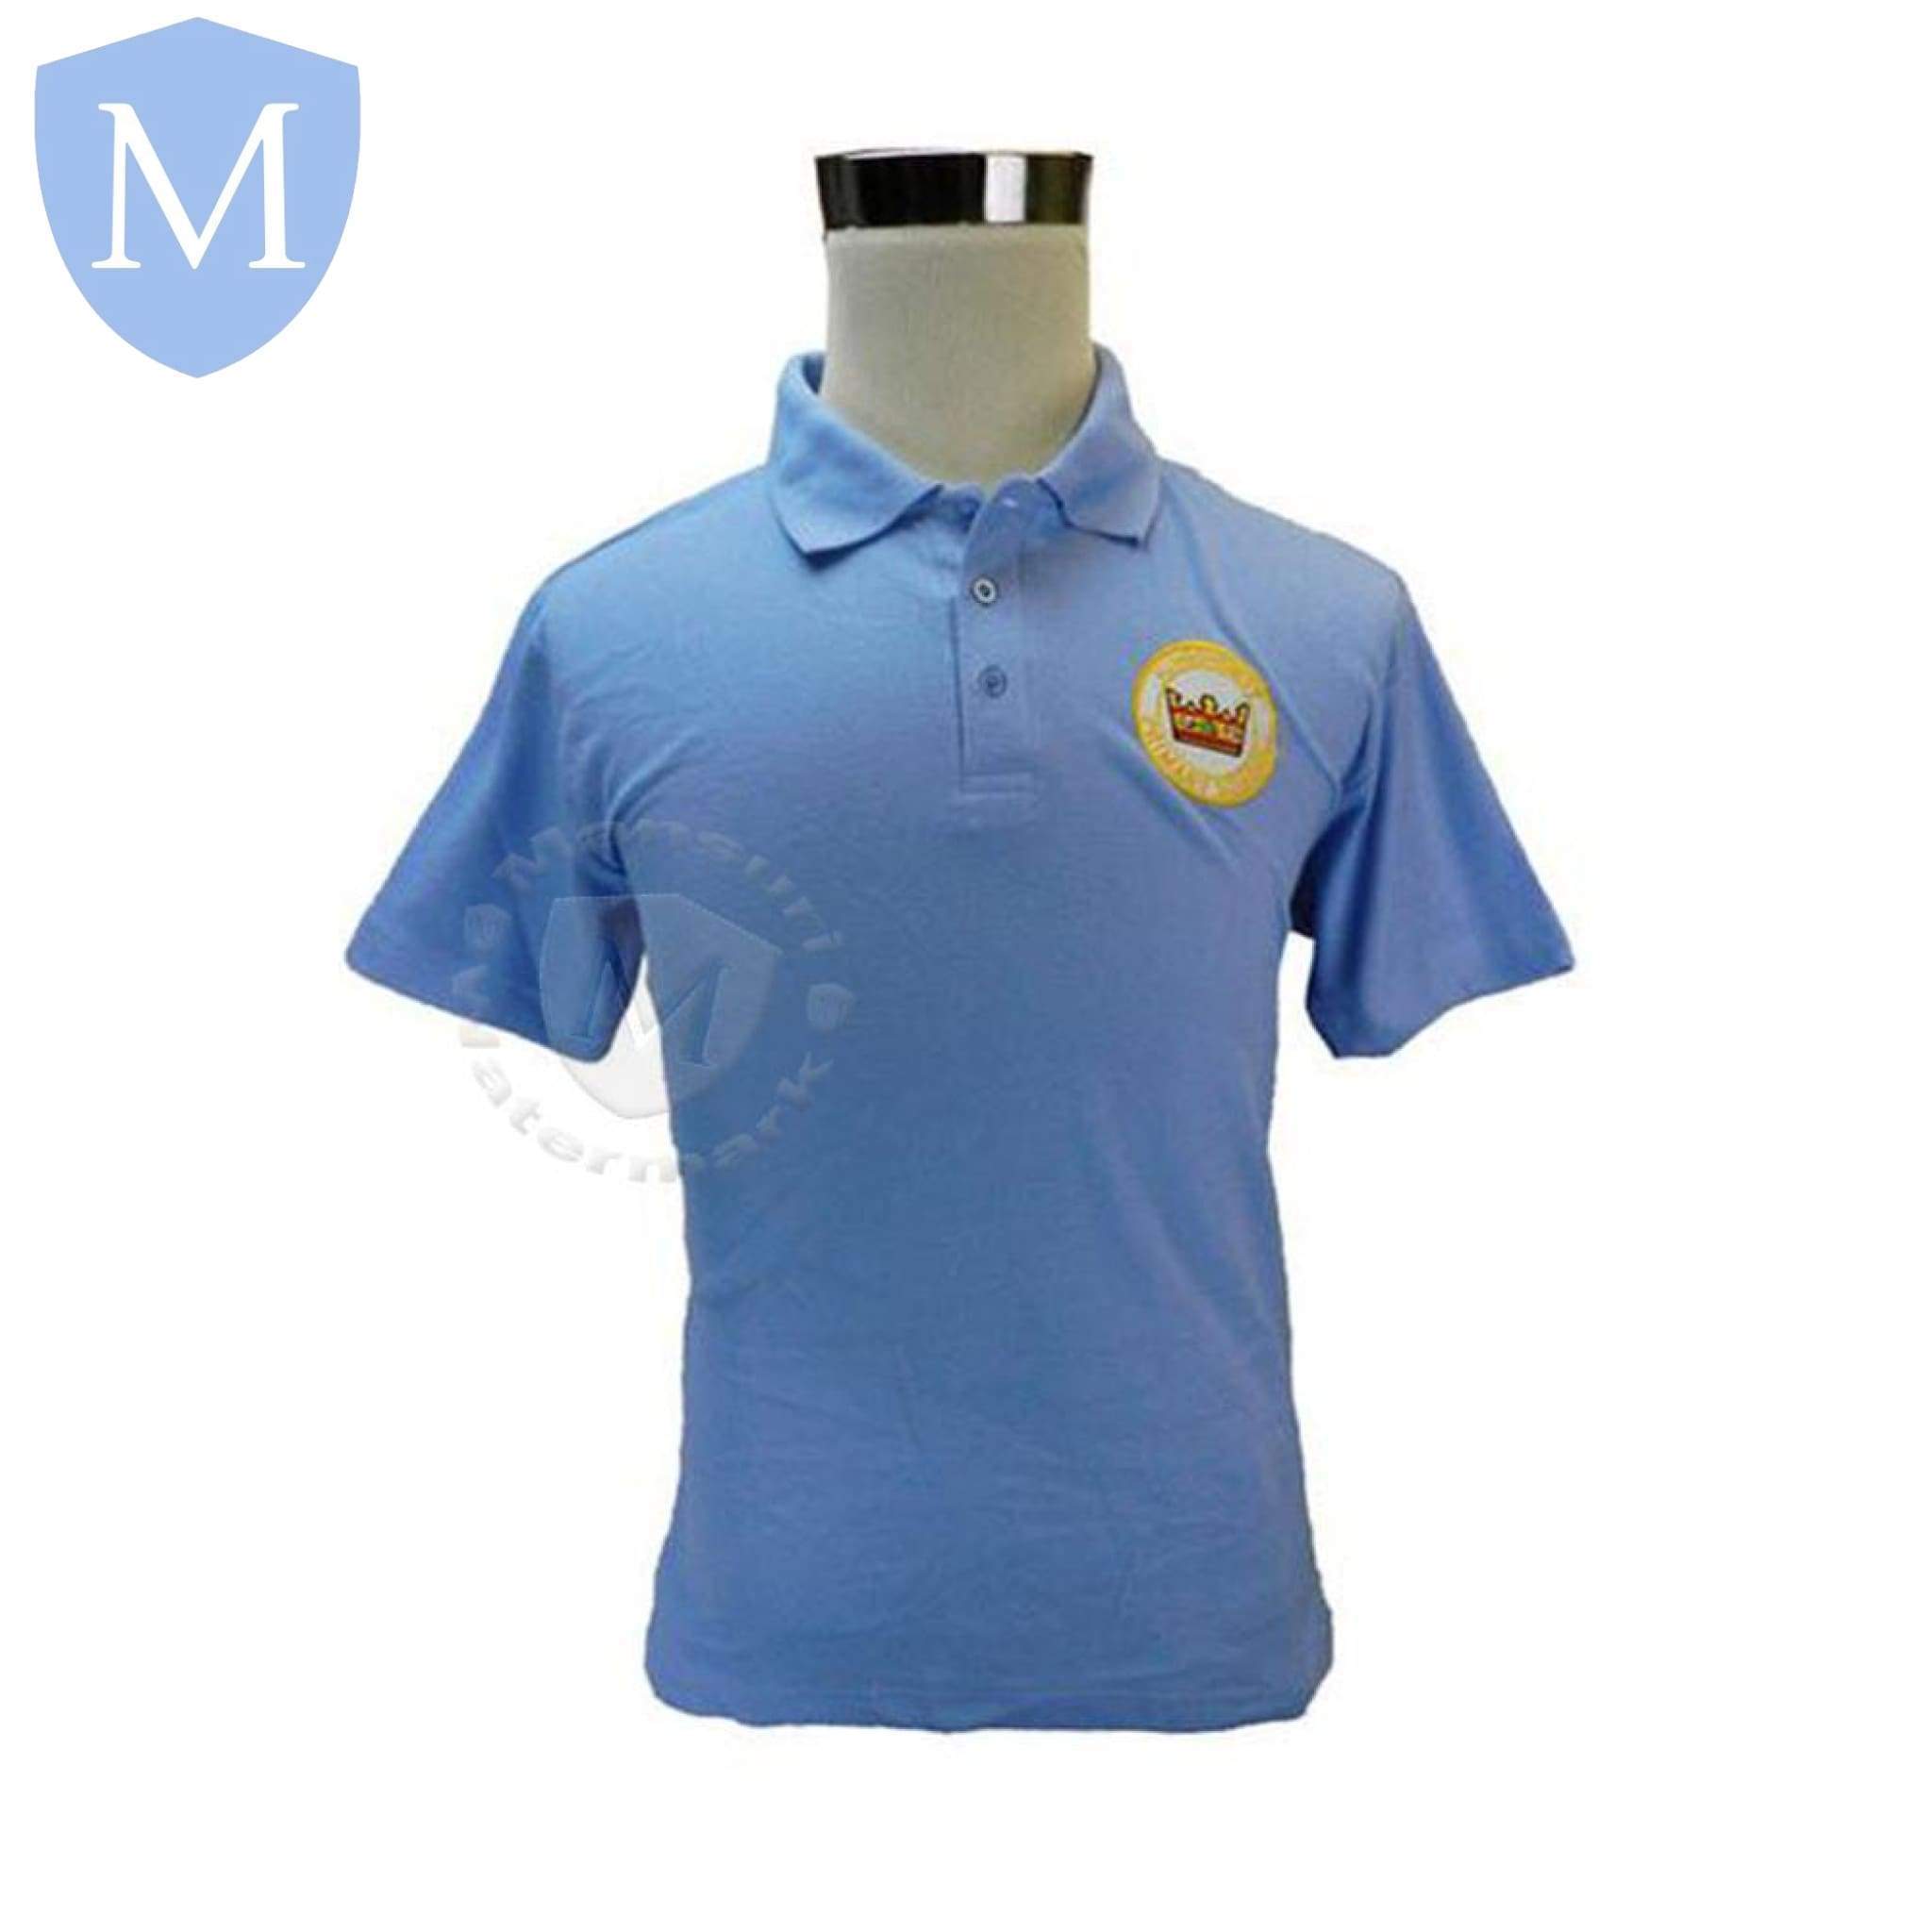 Kingshurst Primary Polo Shirt (Sky Blue) 2-3 Years,11-12 Years,13 Years,3-4 Years,5-6 Years,7-8 Years,9-10 Years,Large,Medium,Small,X-Large,X-Small